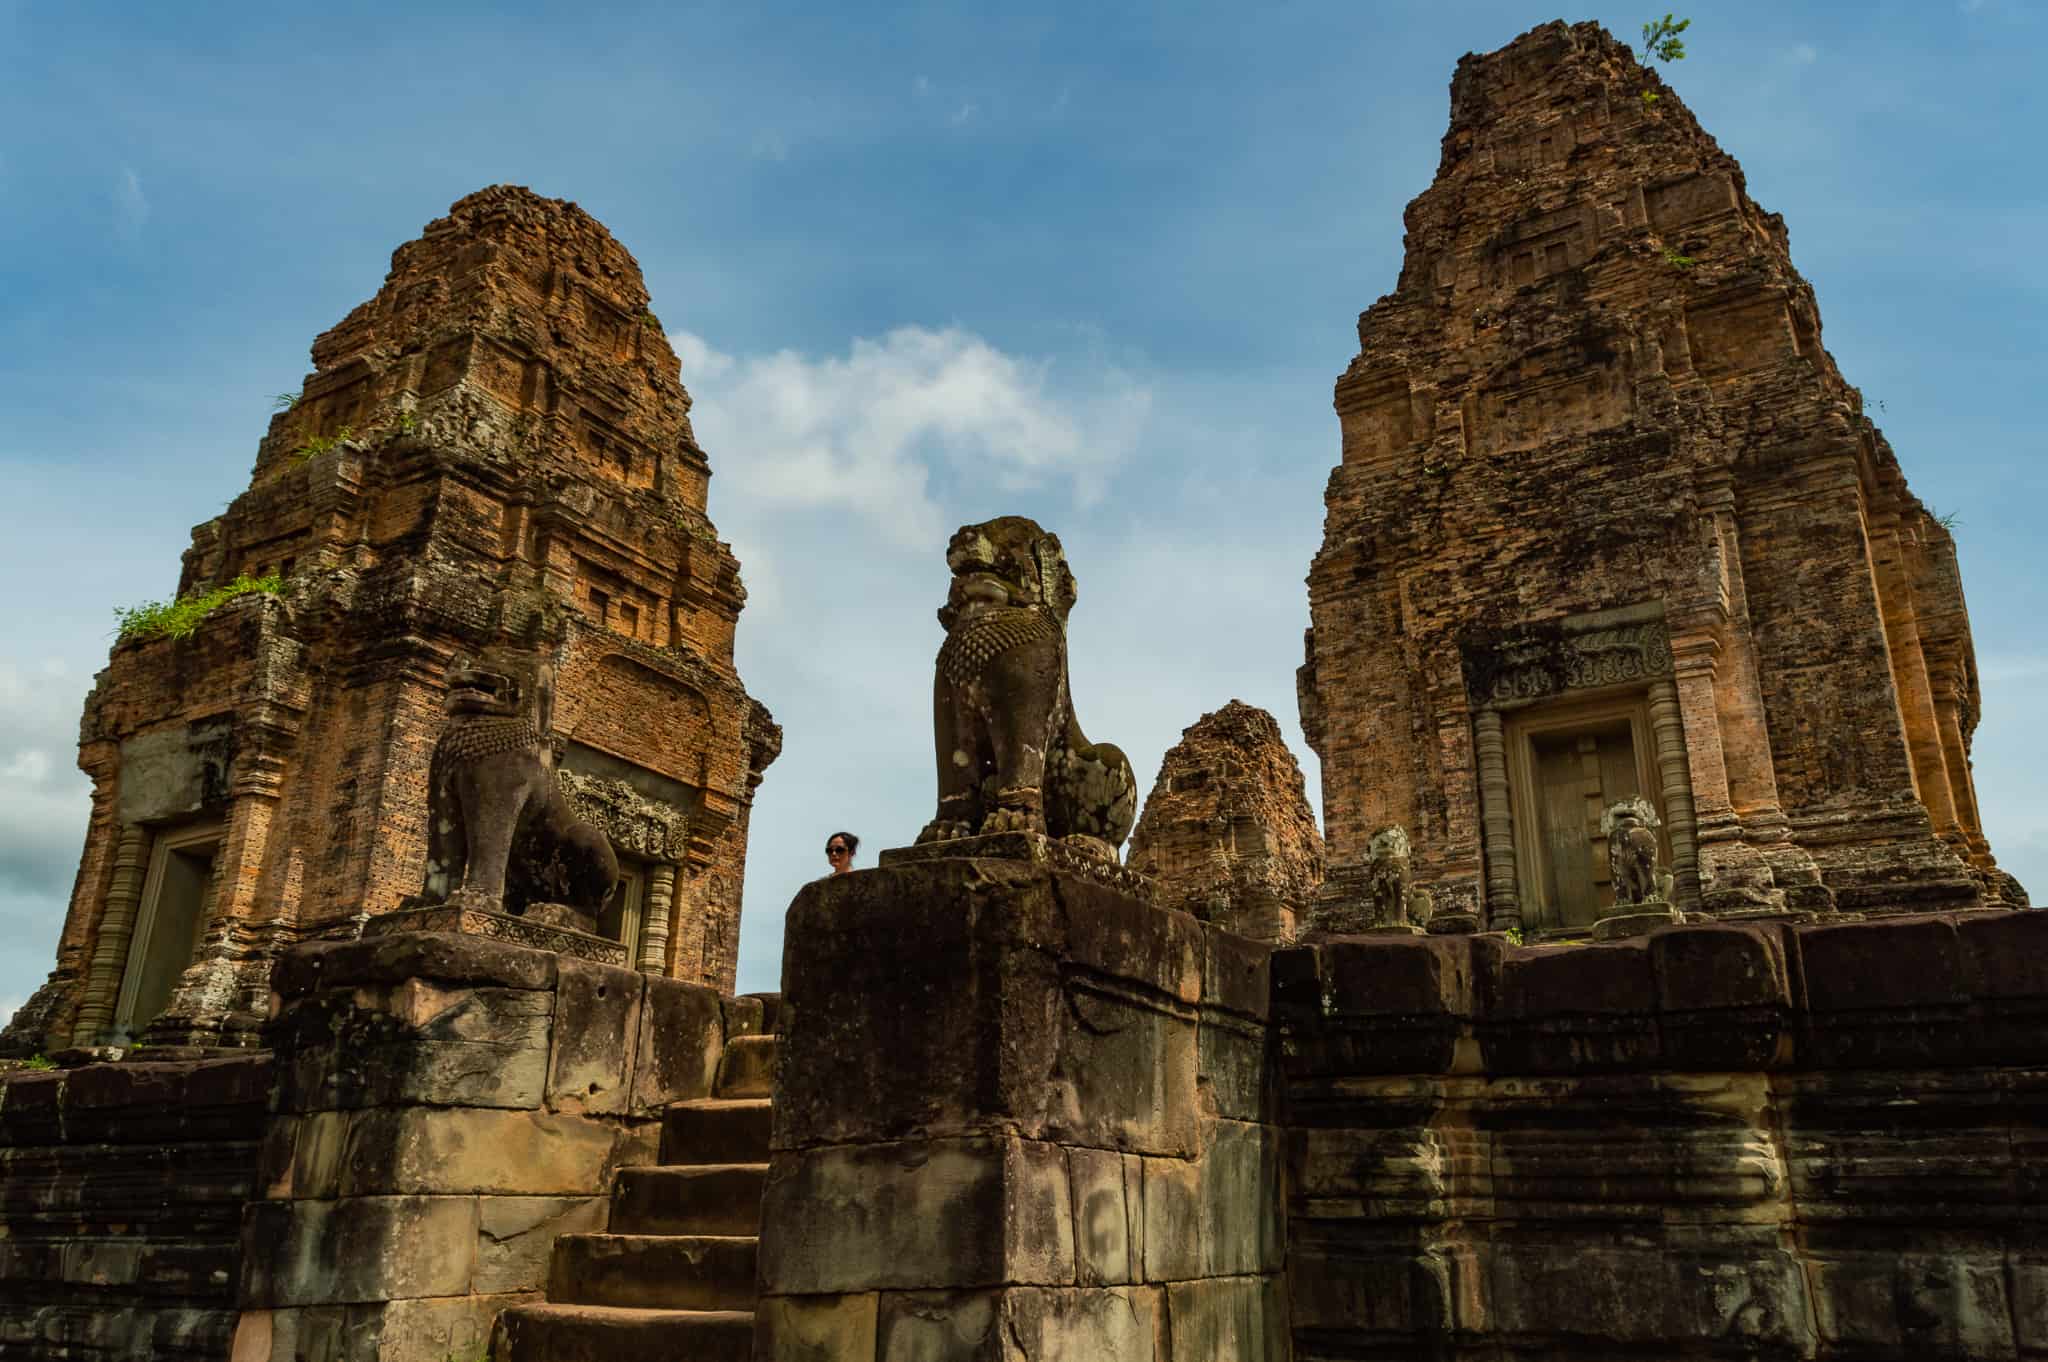 Angkor Wat is the largest temple complex on earth, there is many amazing structures to explore!Q